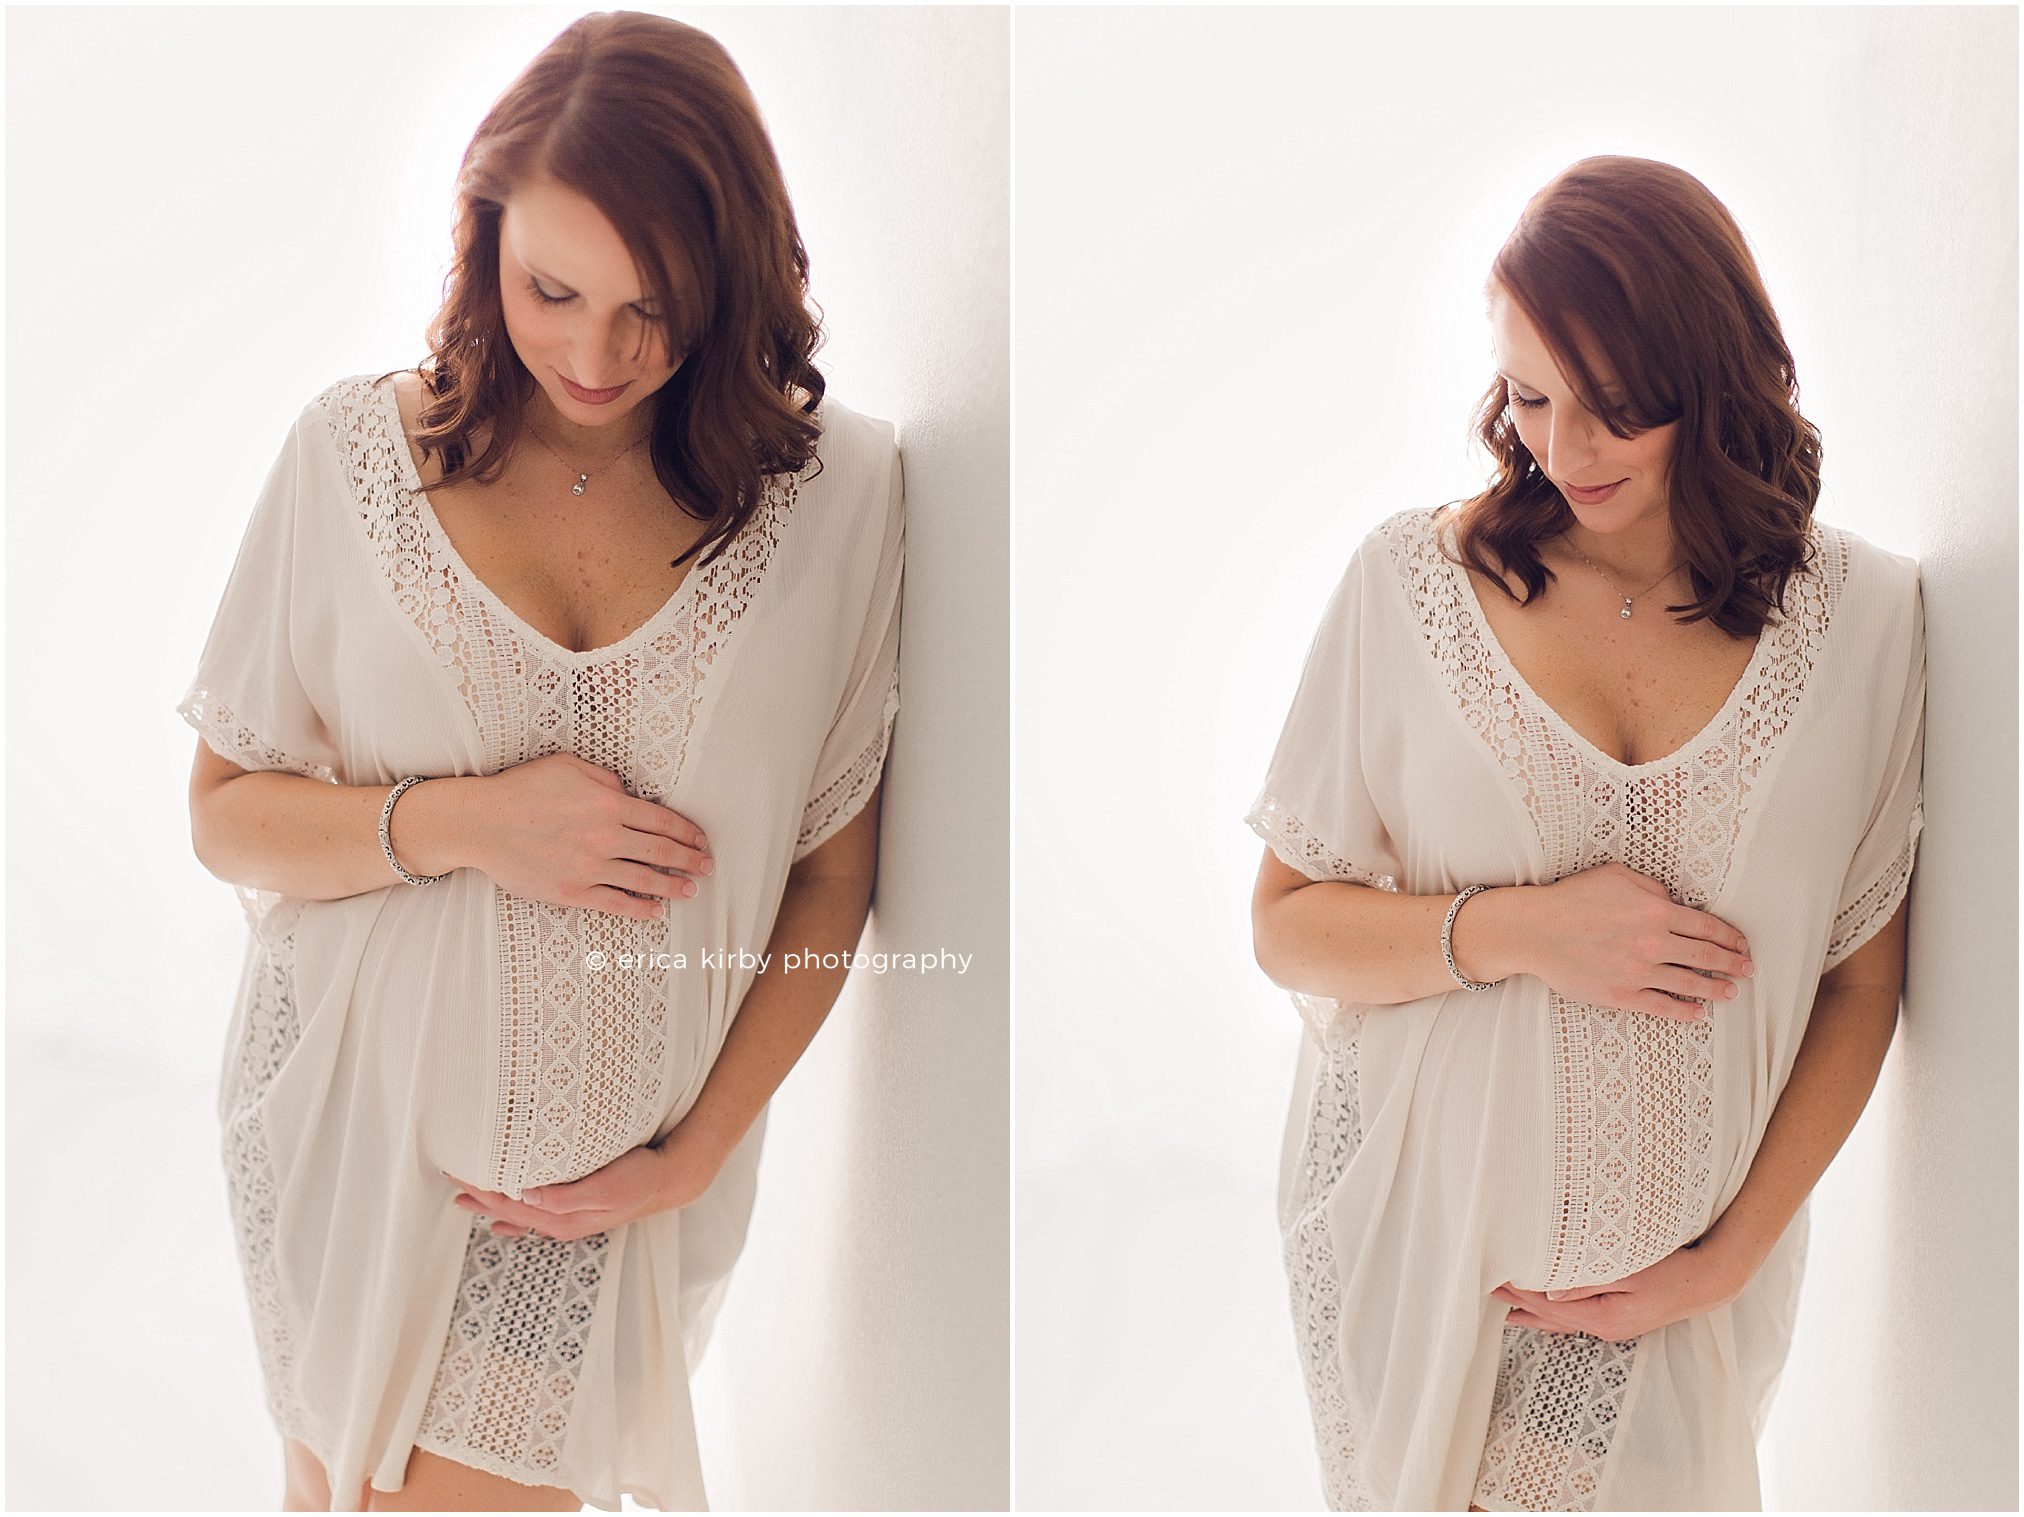  maternity photography session nwa - studio maternity session in northwest arkansas bentonville fayetteville rogers - erica kirby photography